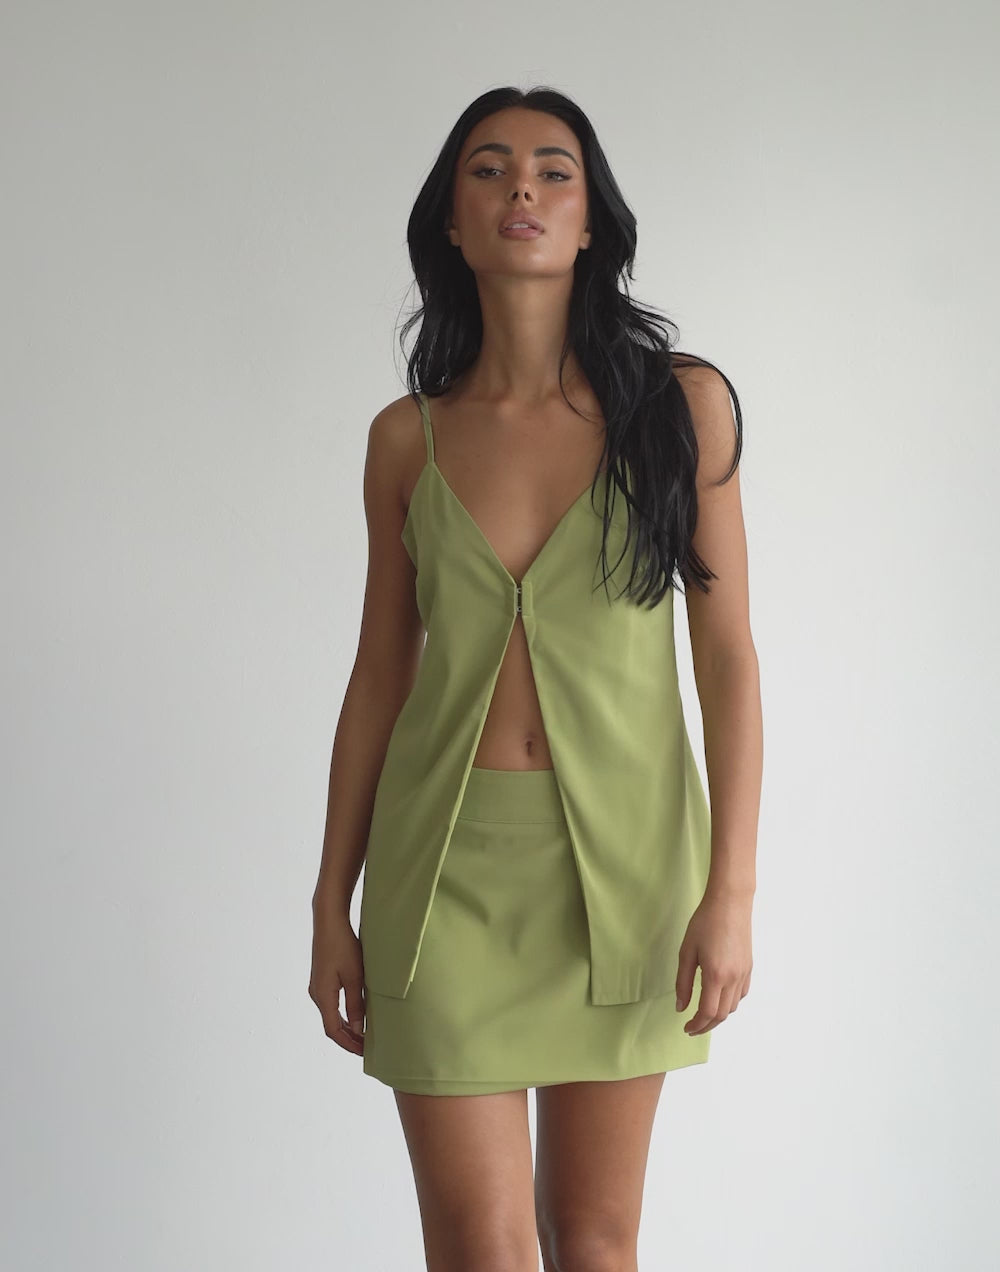 Orchid Top (Olive)